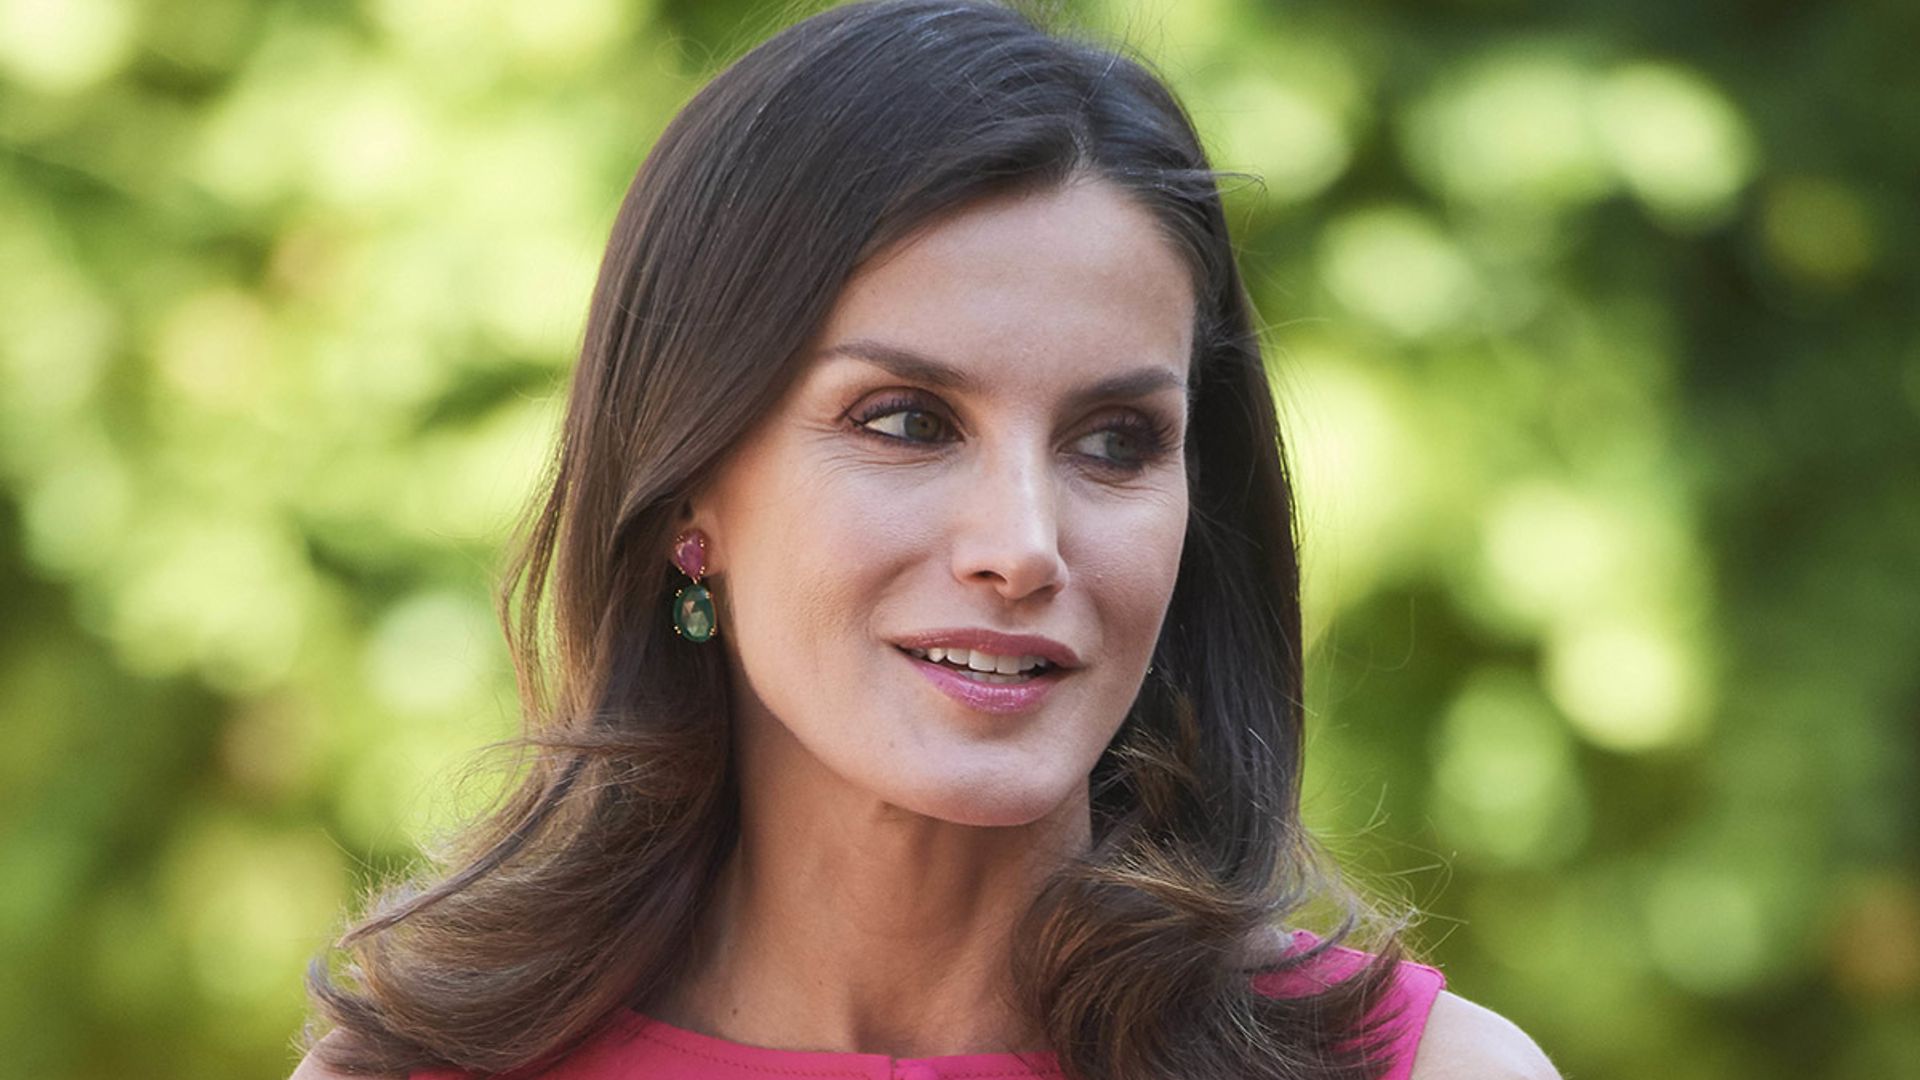 Summer style Queen! Spain's Letizia just wore the PERFECT wedding guest dress